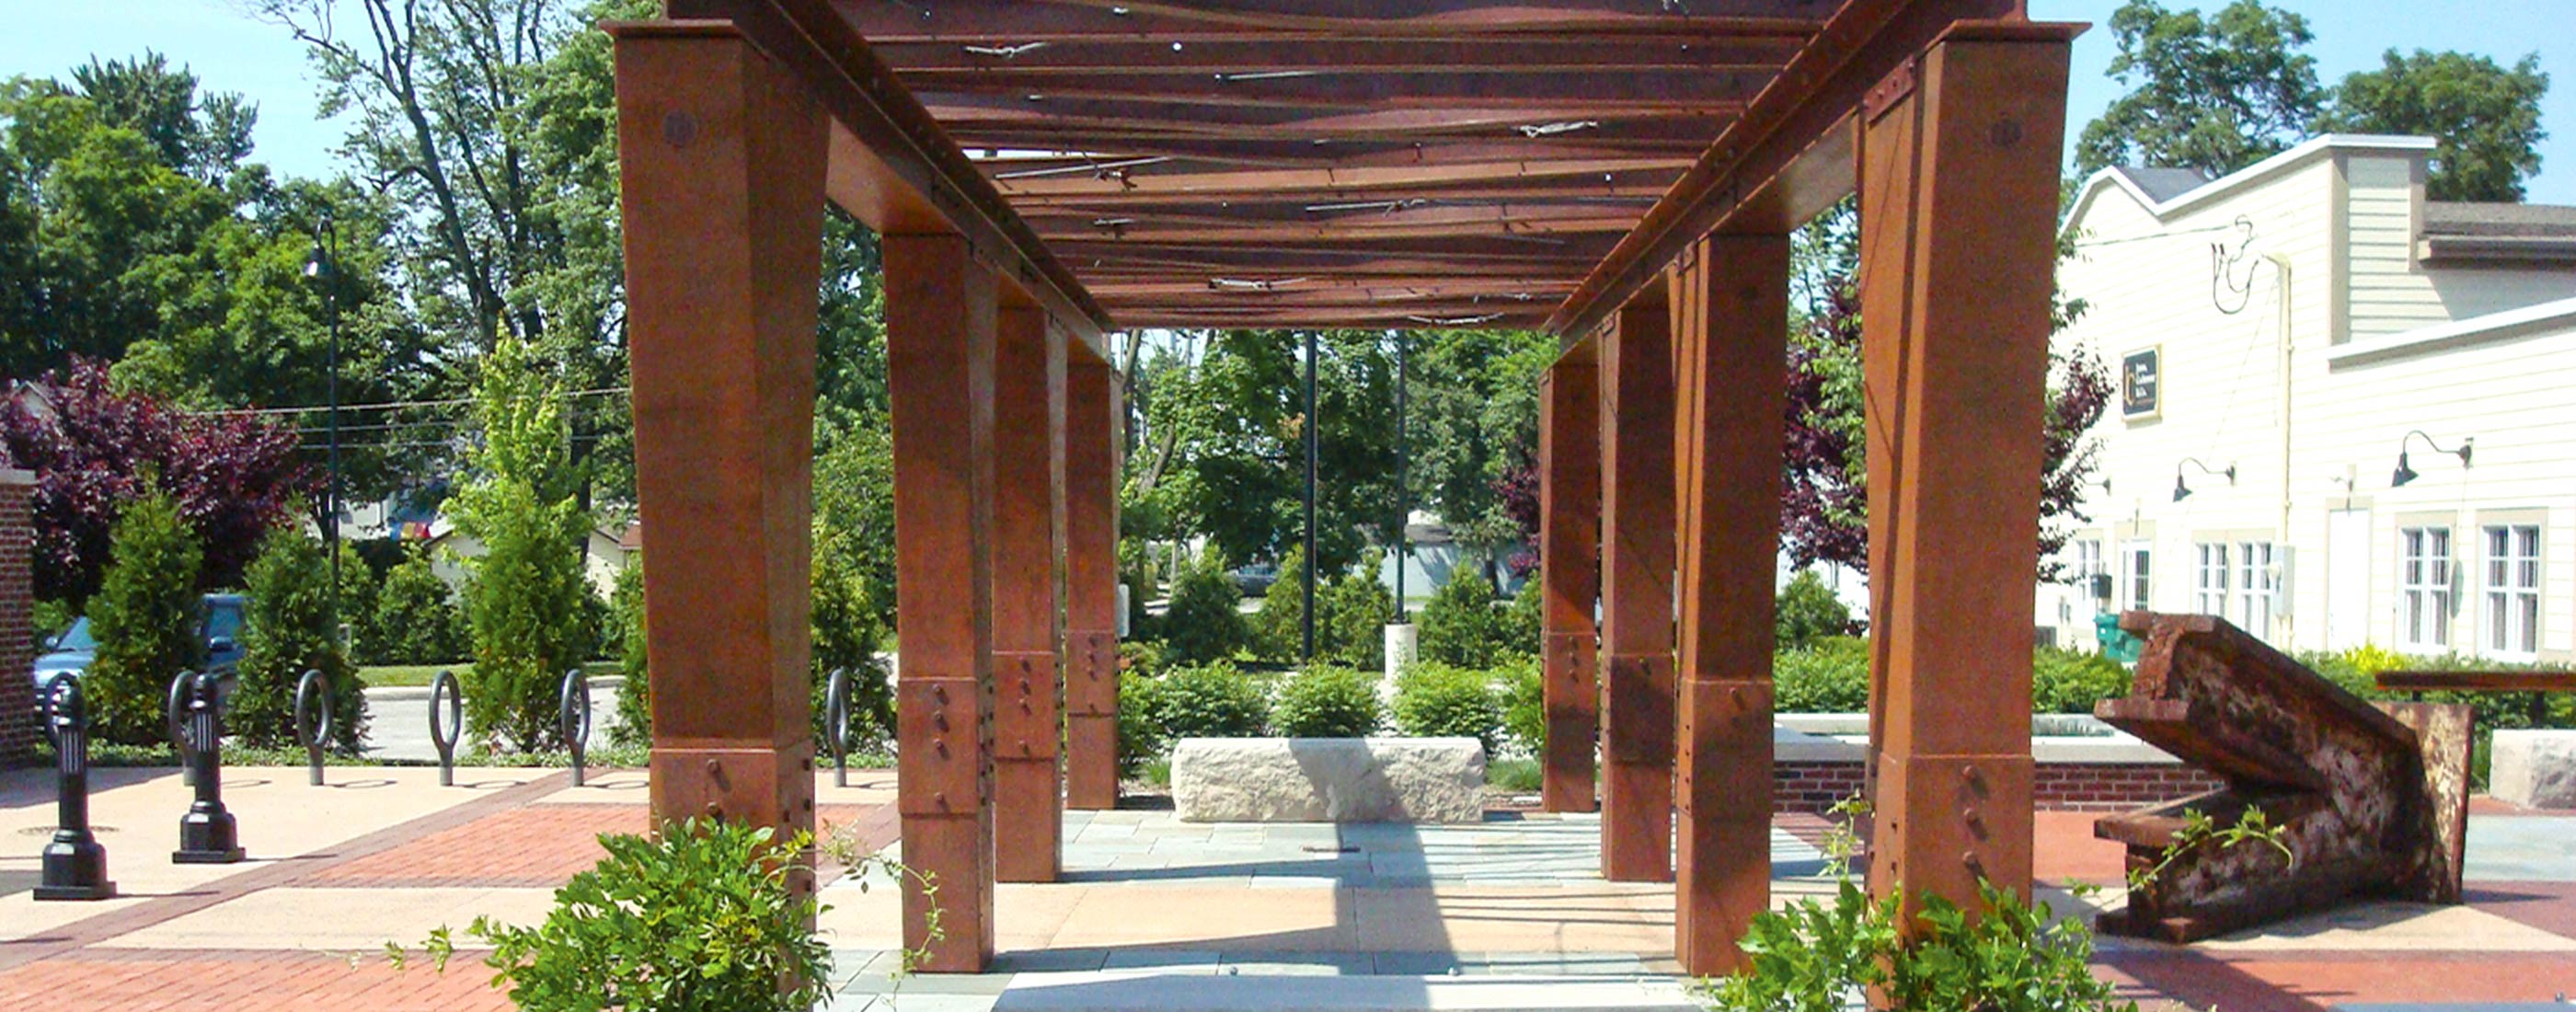 Trellis, surrounded by stone and brick seating areas, incorporates steel from towers of World Trade Center.